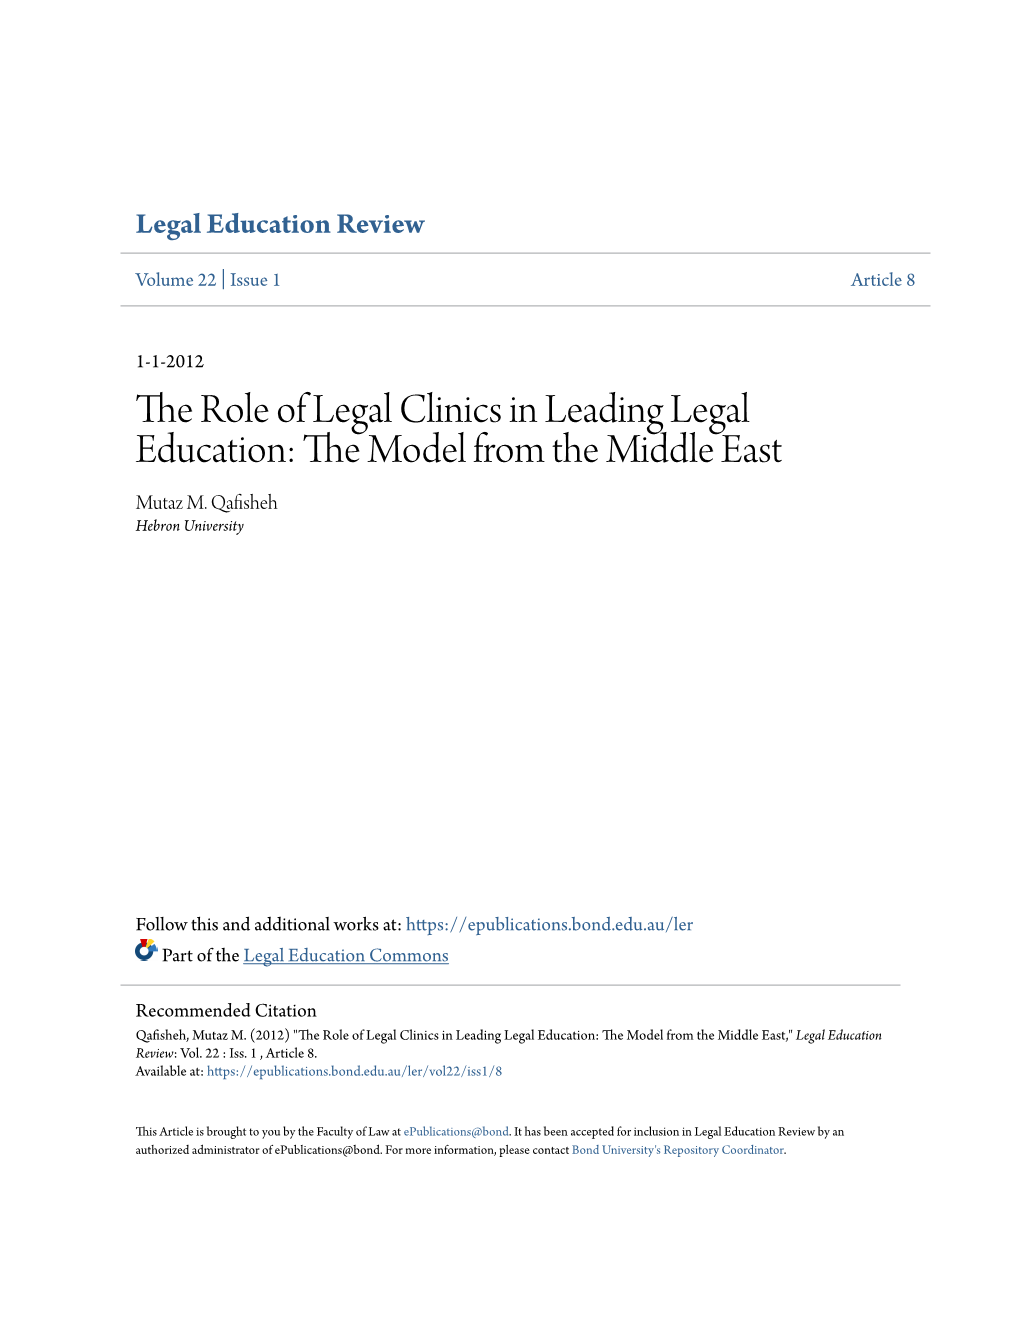 The Role of Legal Clinics in Leading Legal Education: the Model From